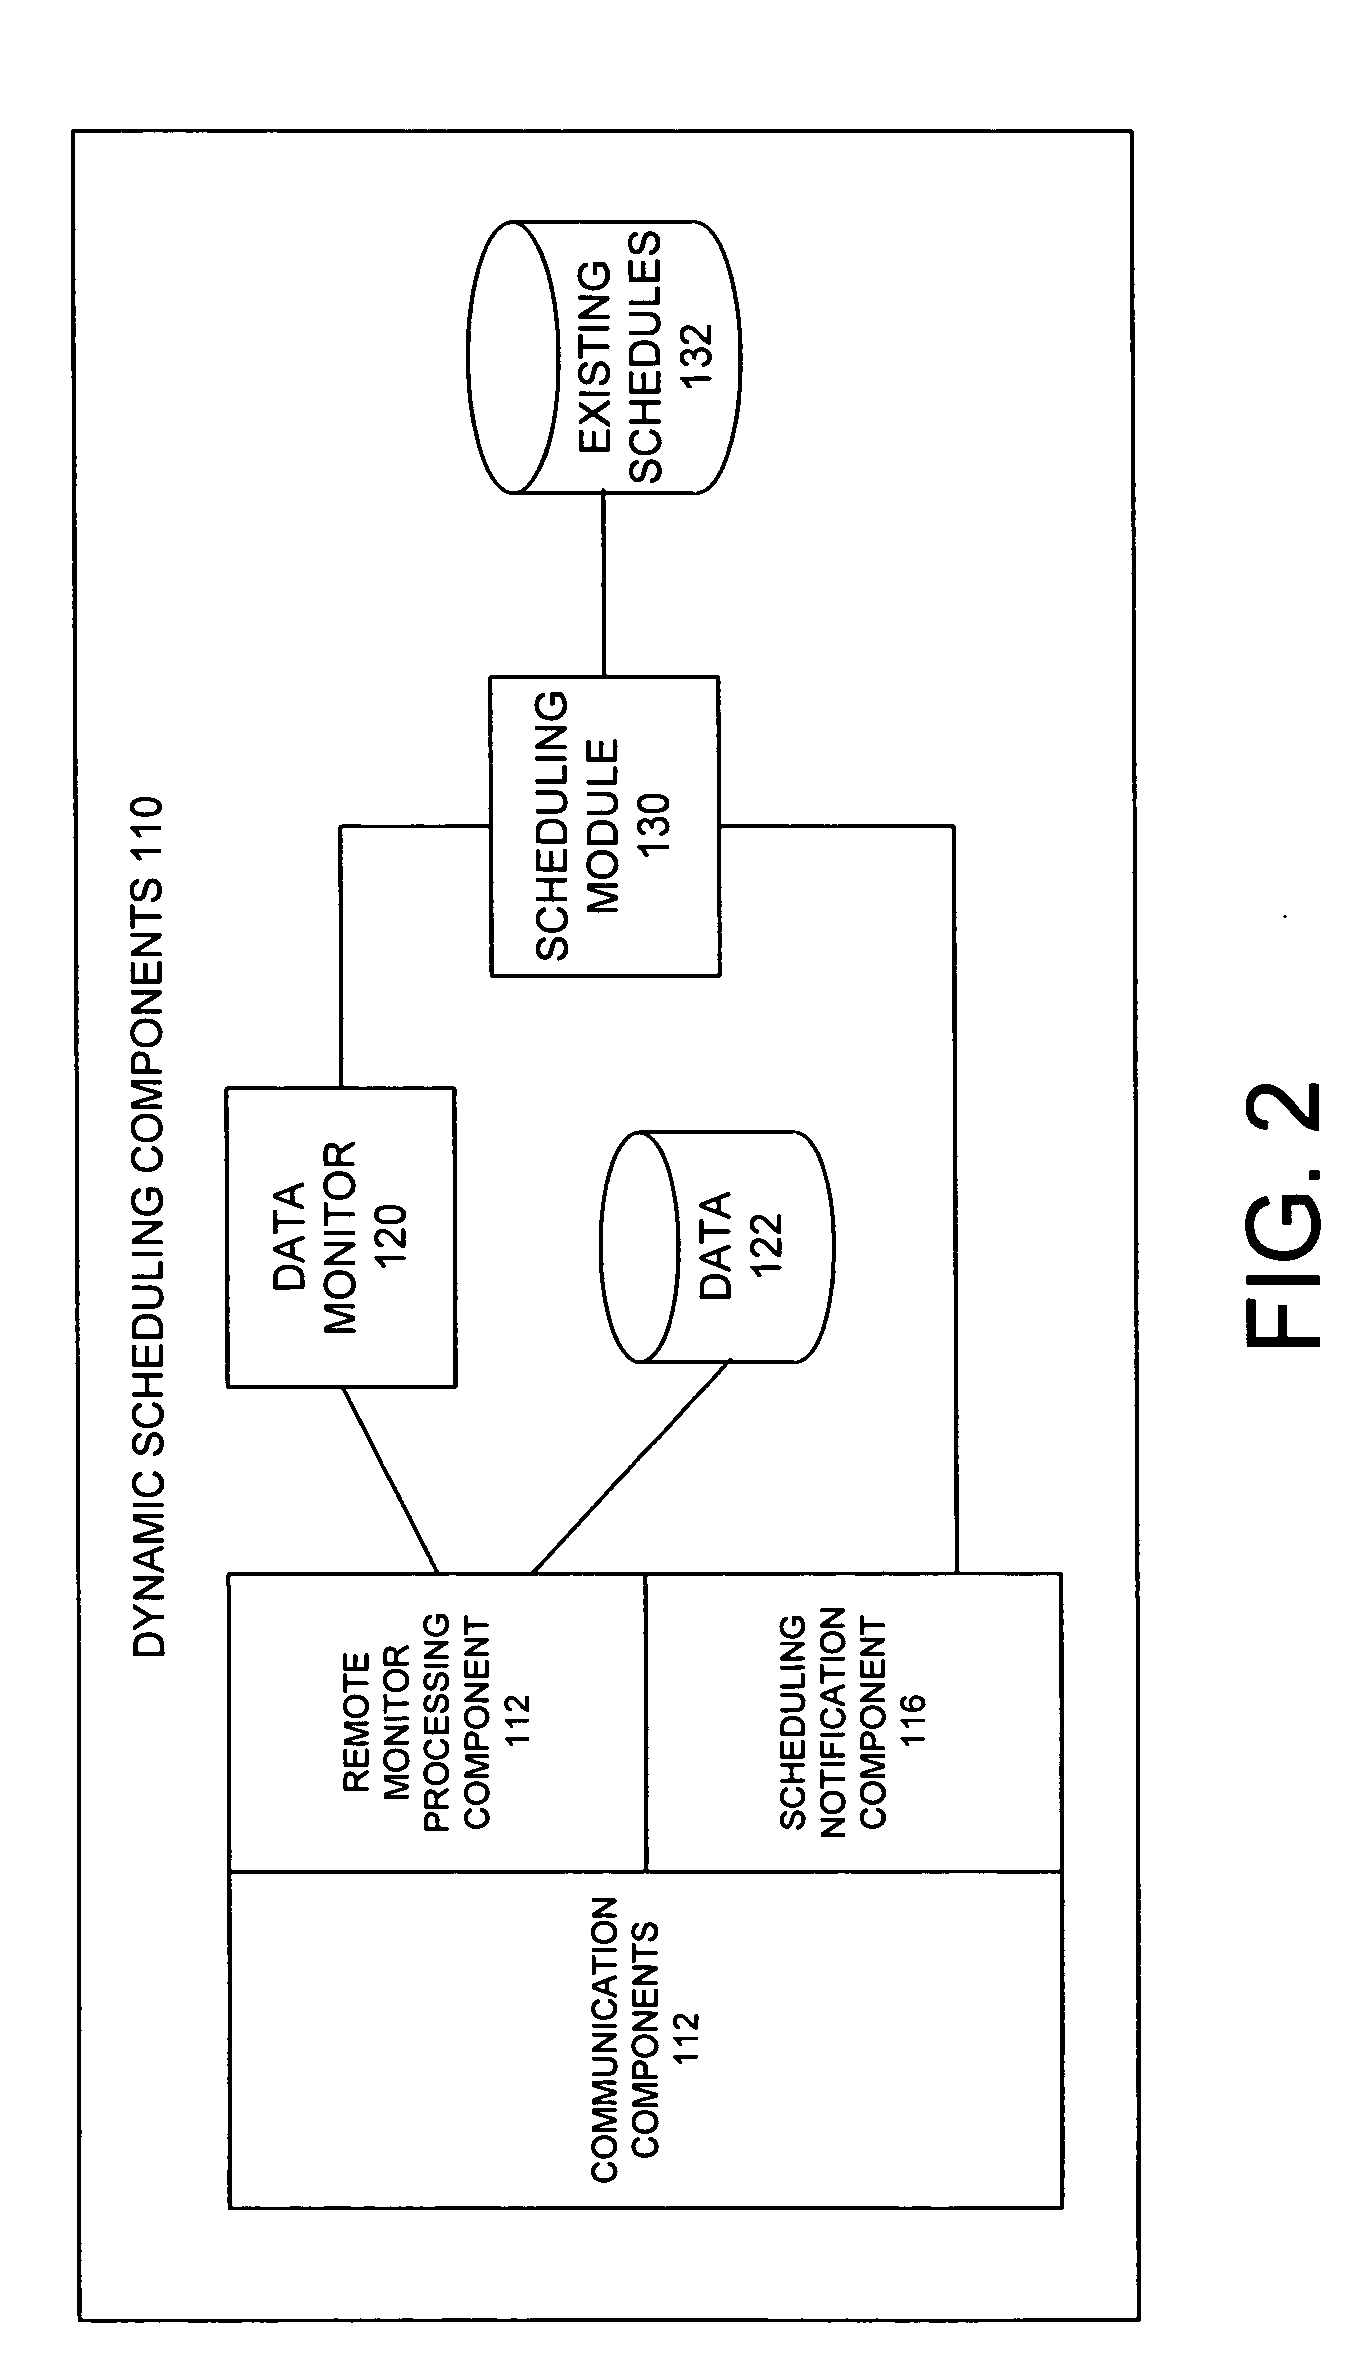 System and method for automatic scheduling based on remote monitoring